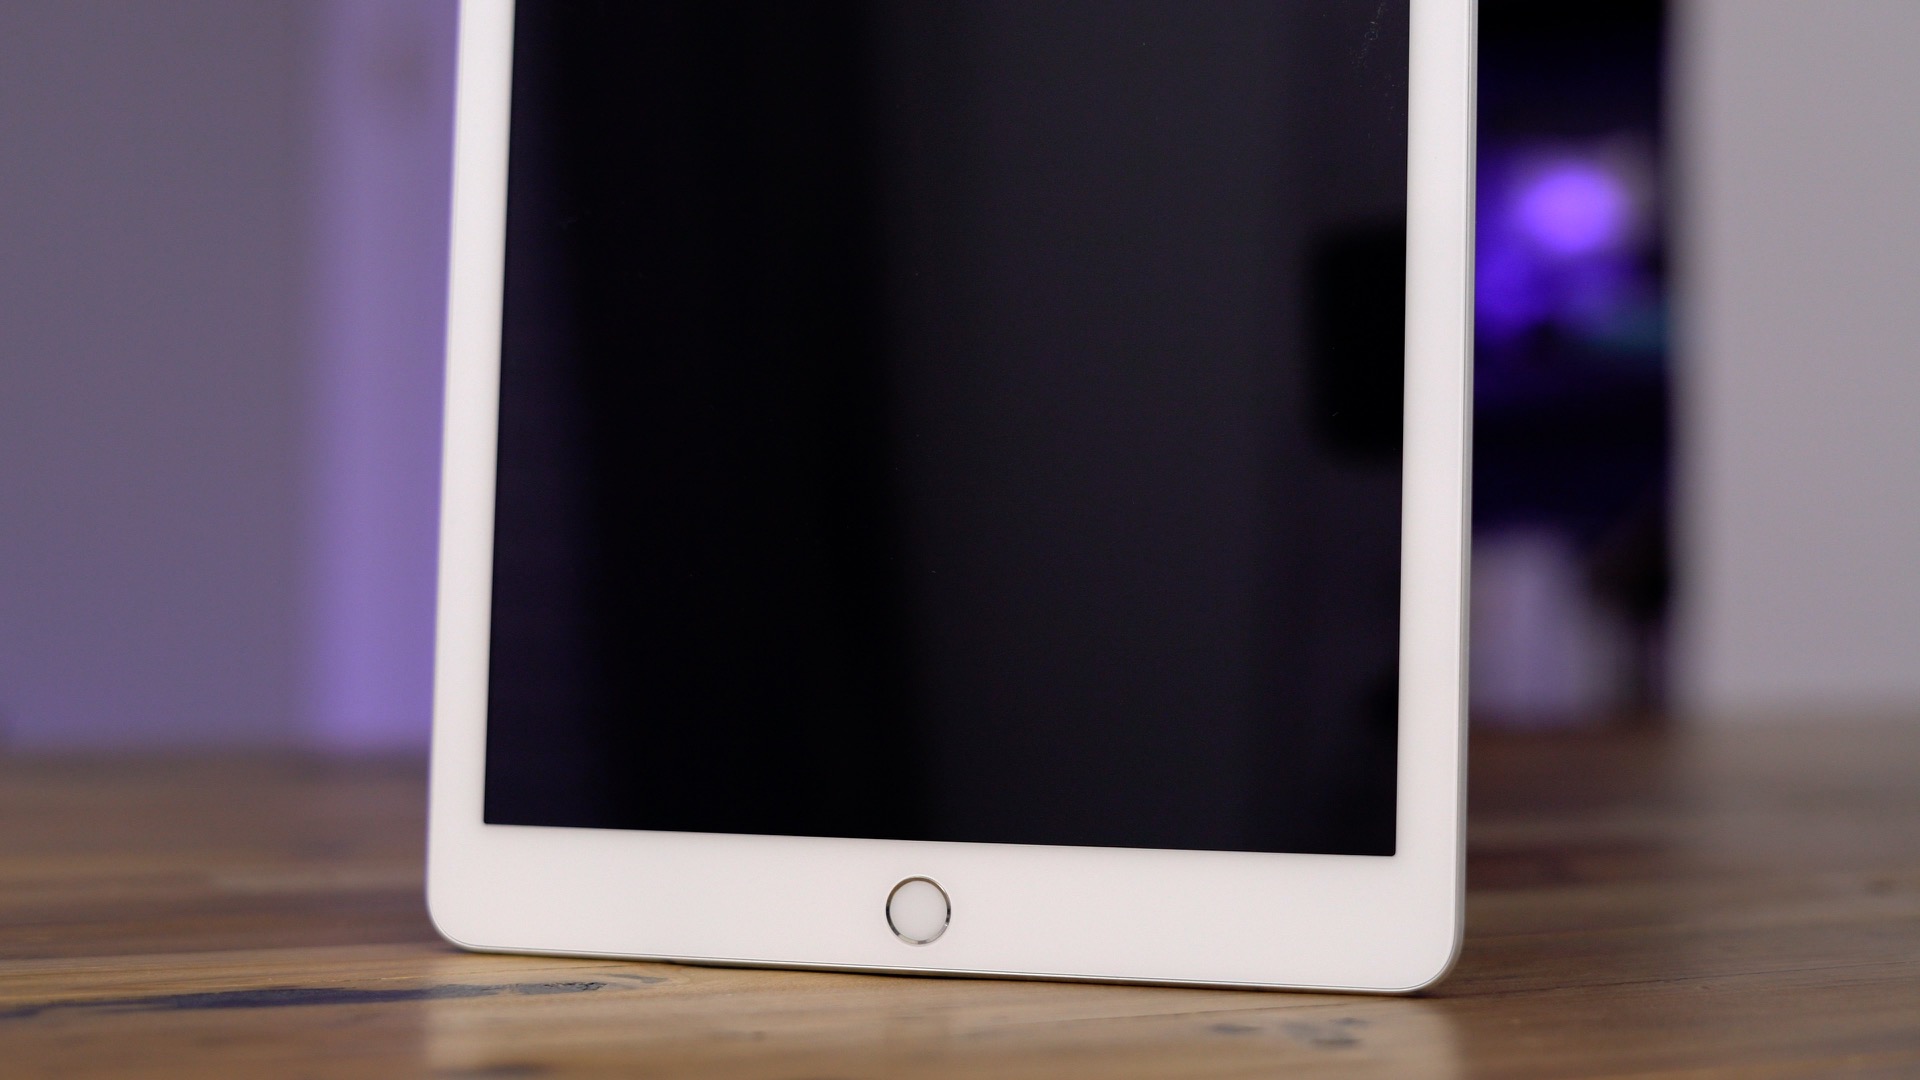 Review: Apple's $329 iPad is not without compromise, but a